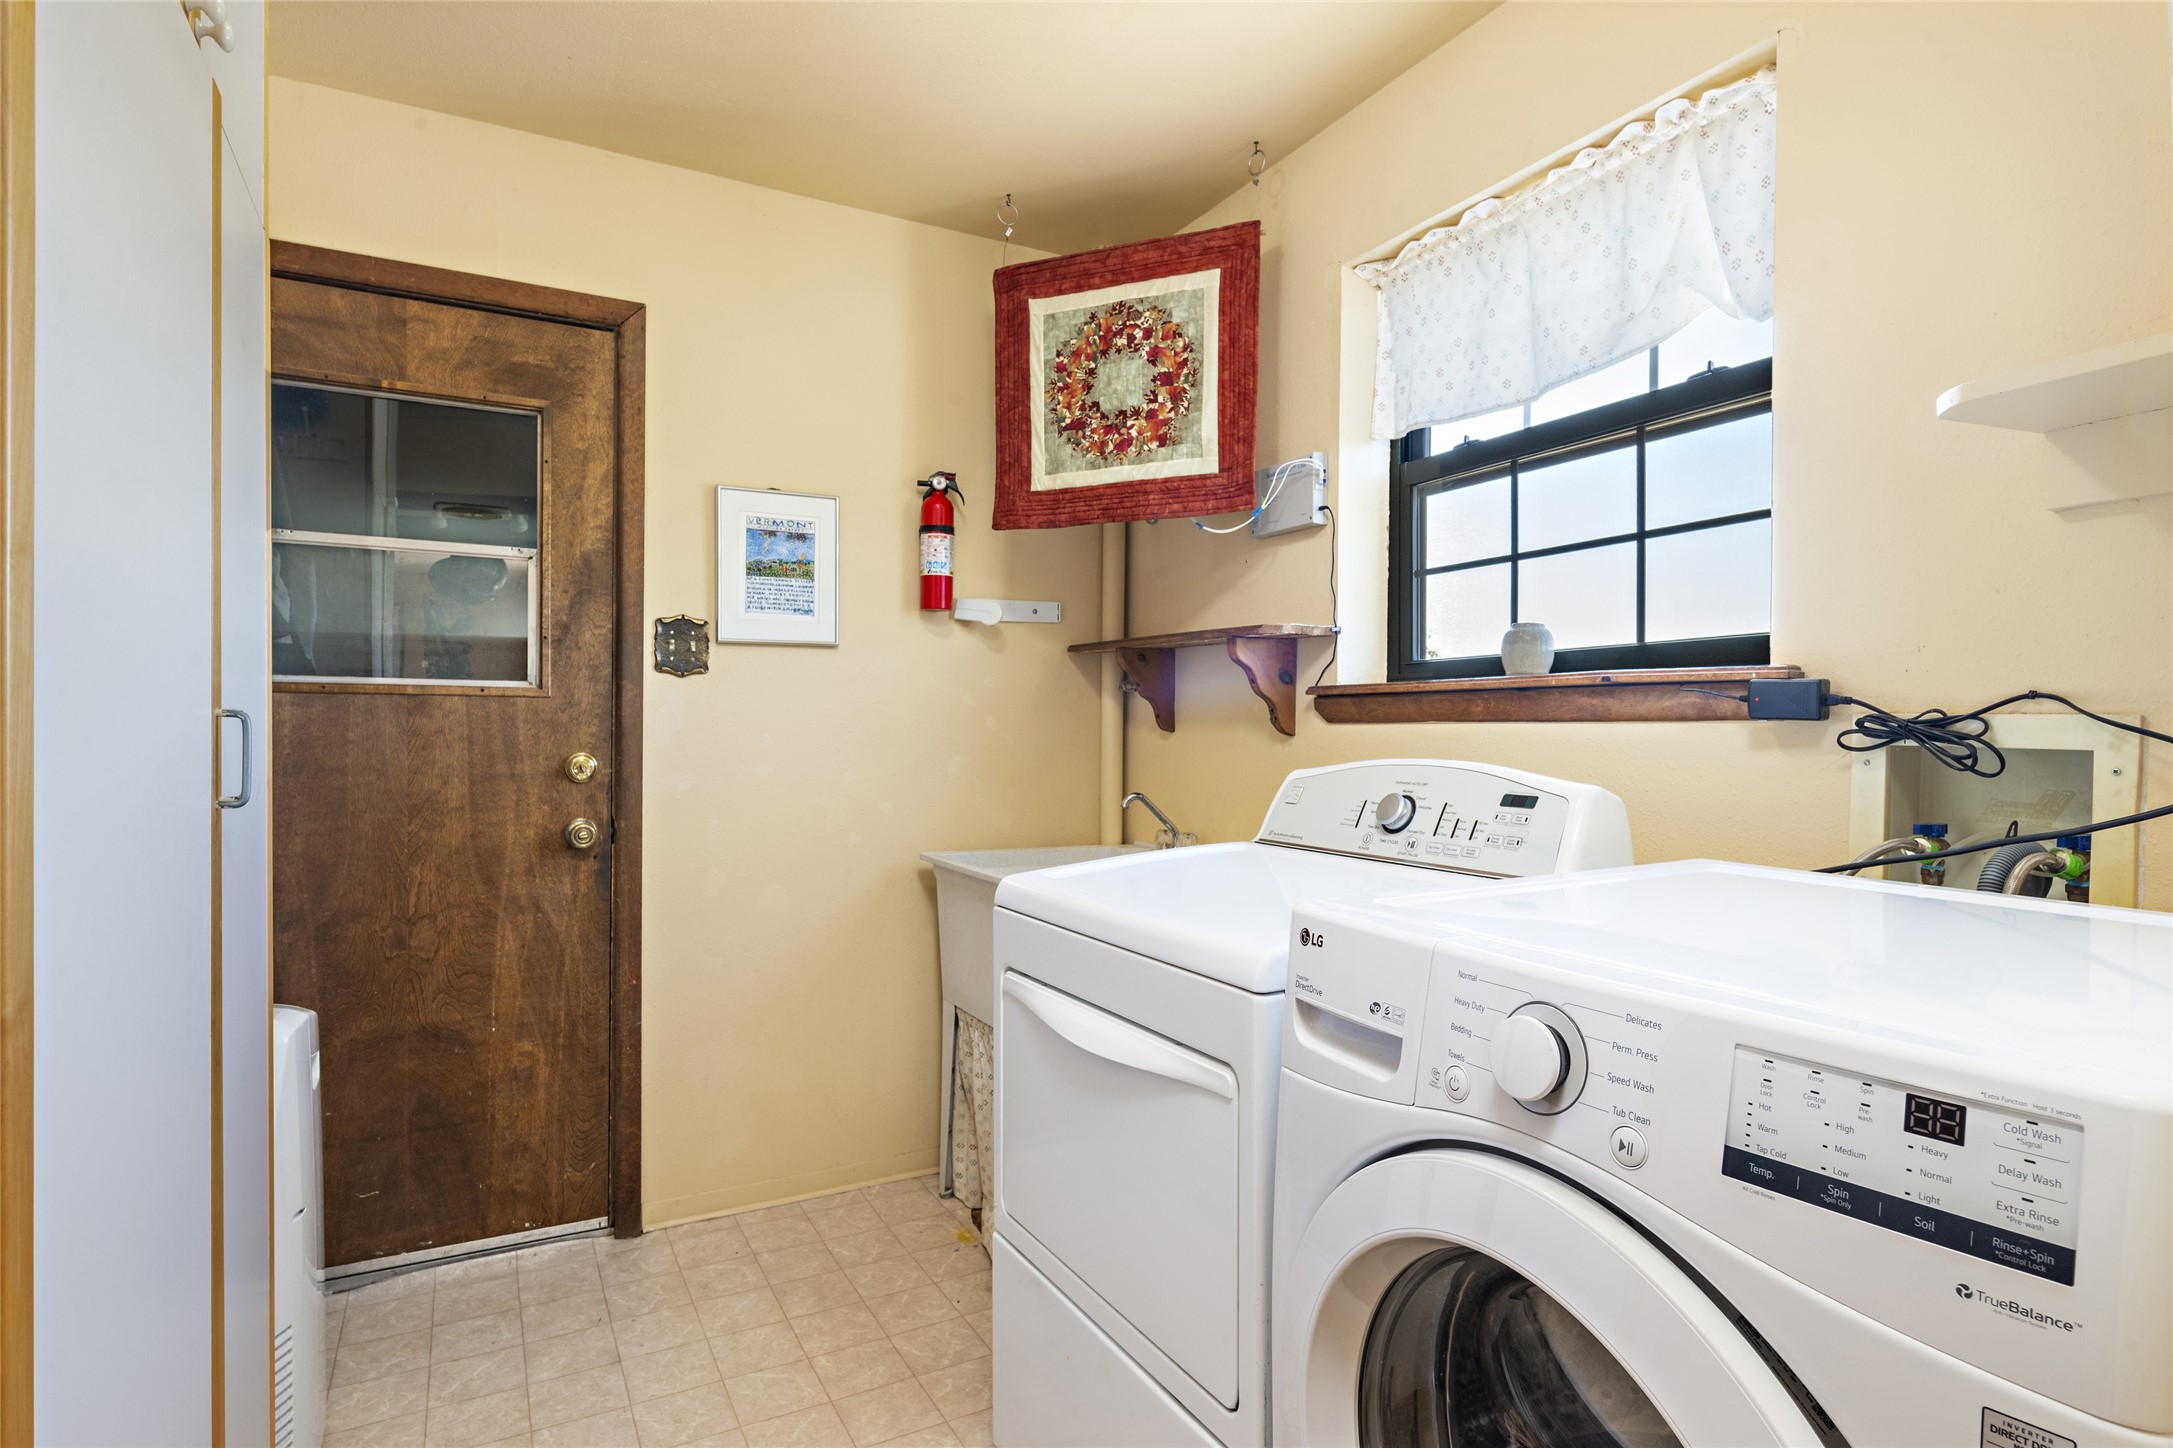 Property laundry room with storage